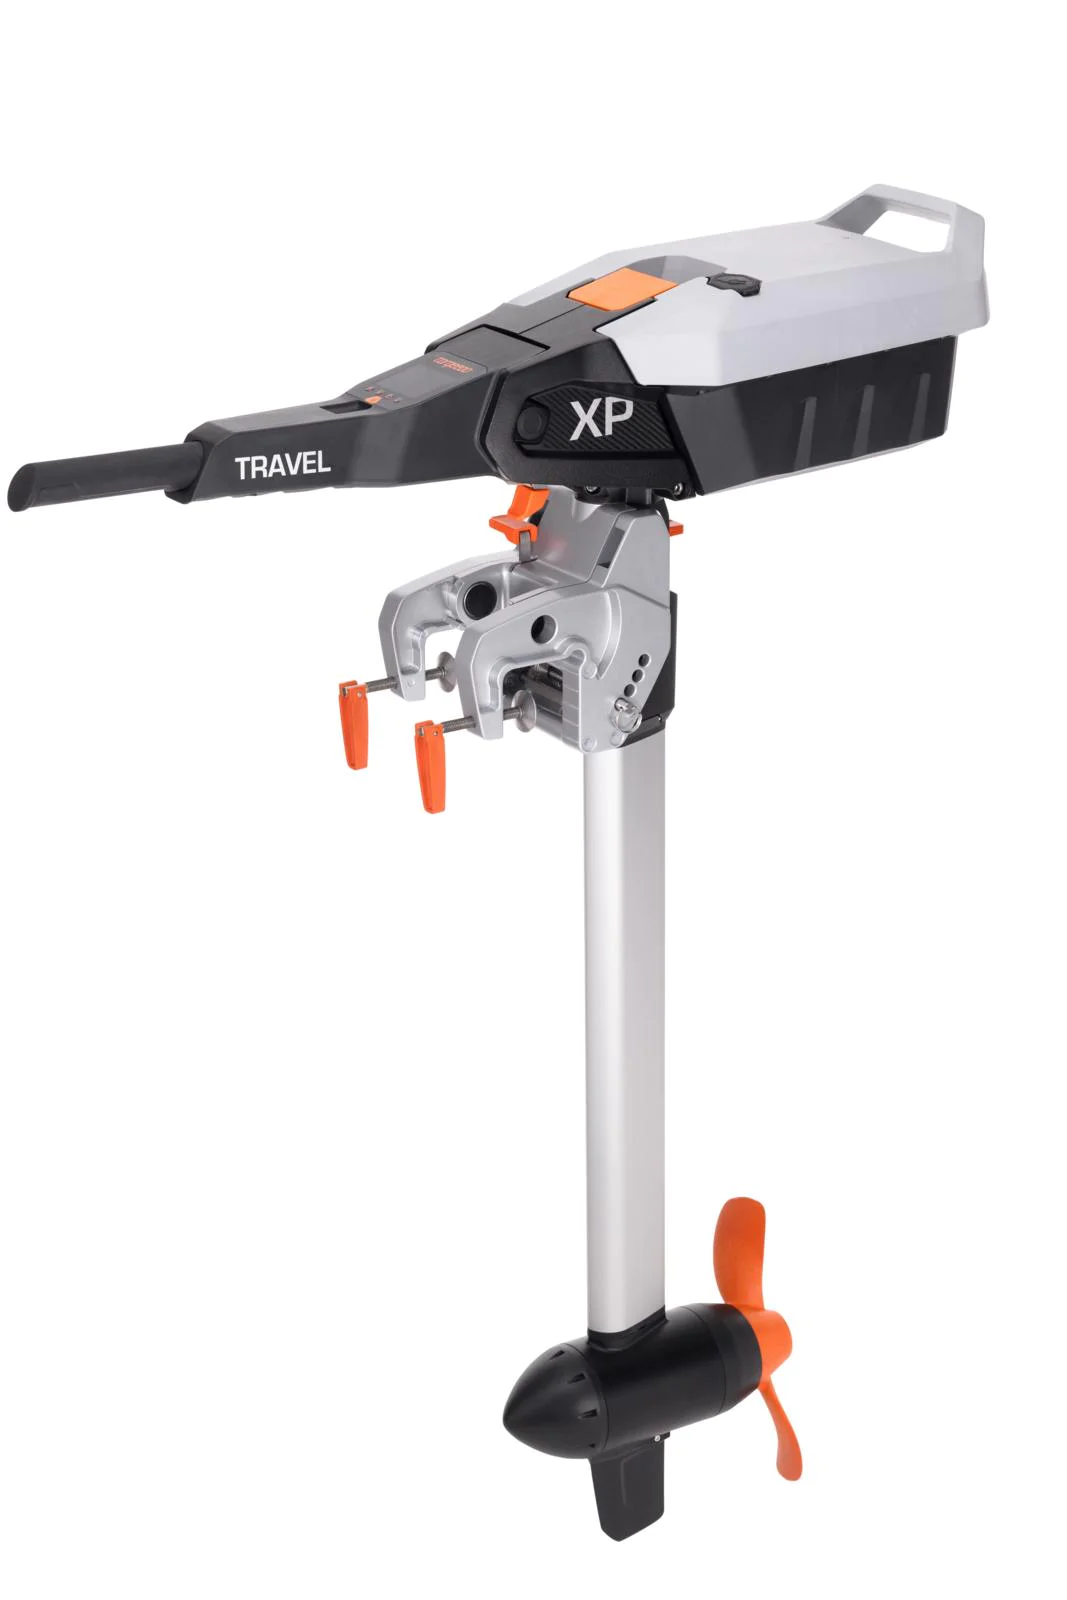 Torqeedo’s Travel XP electric outboard engine